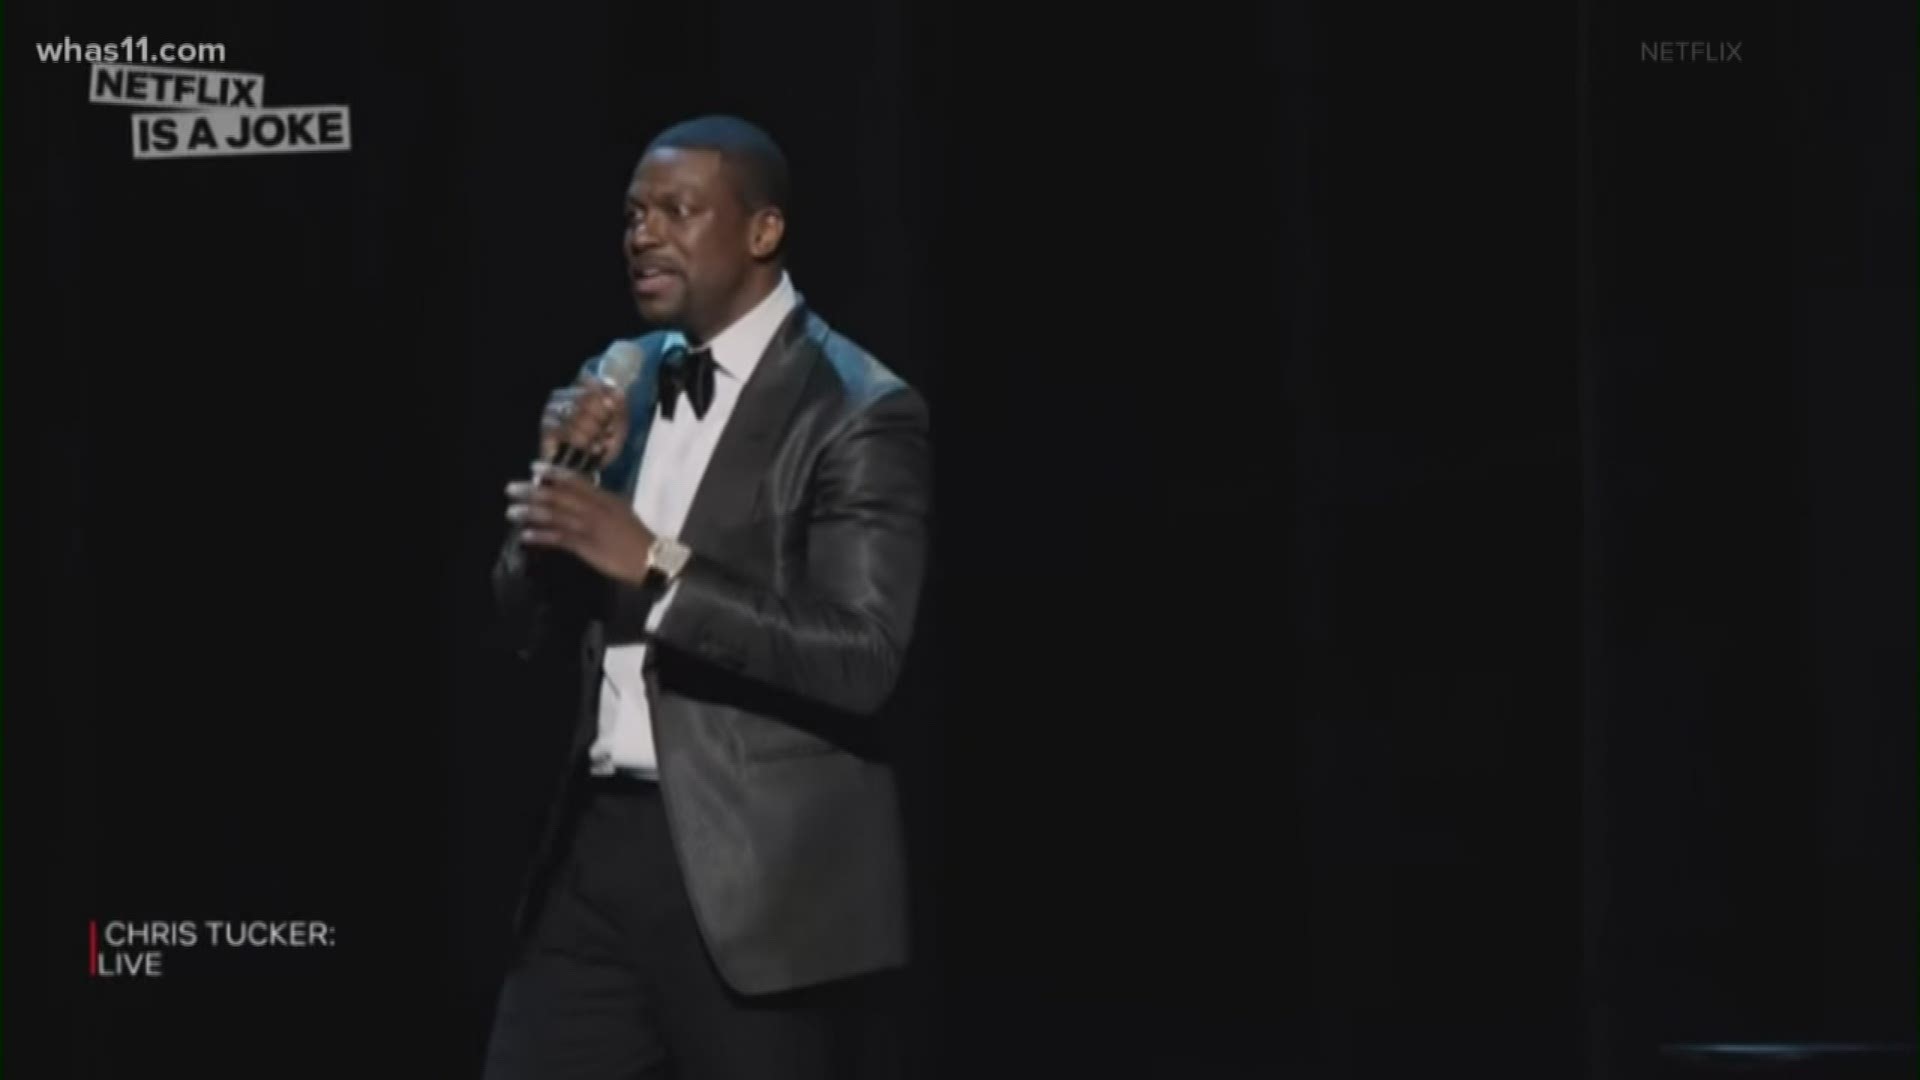 The 411 talks Chris Tucker, KDF and more